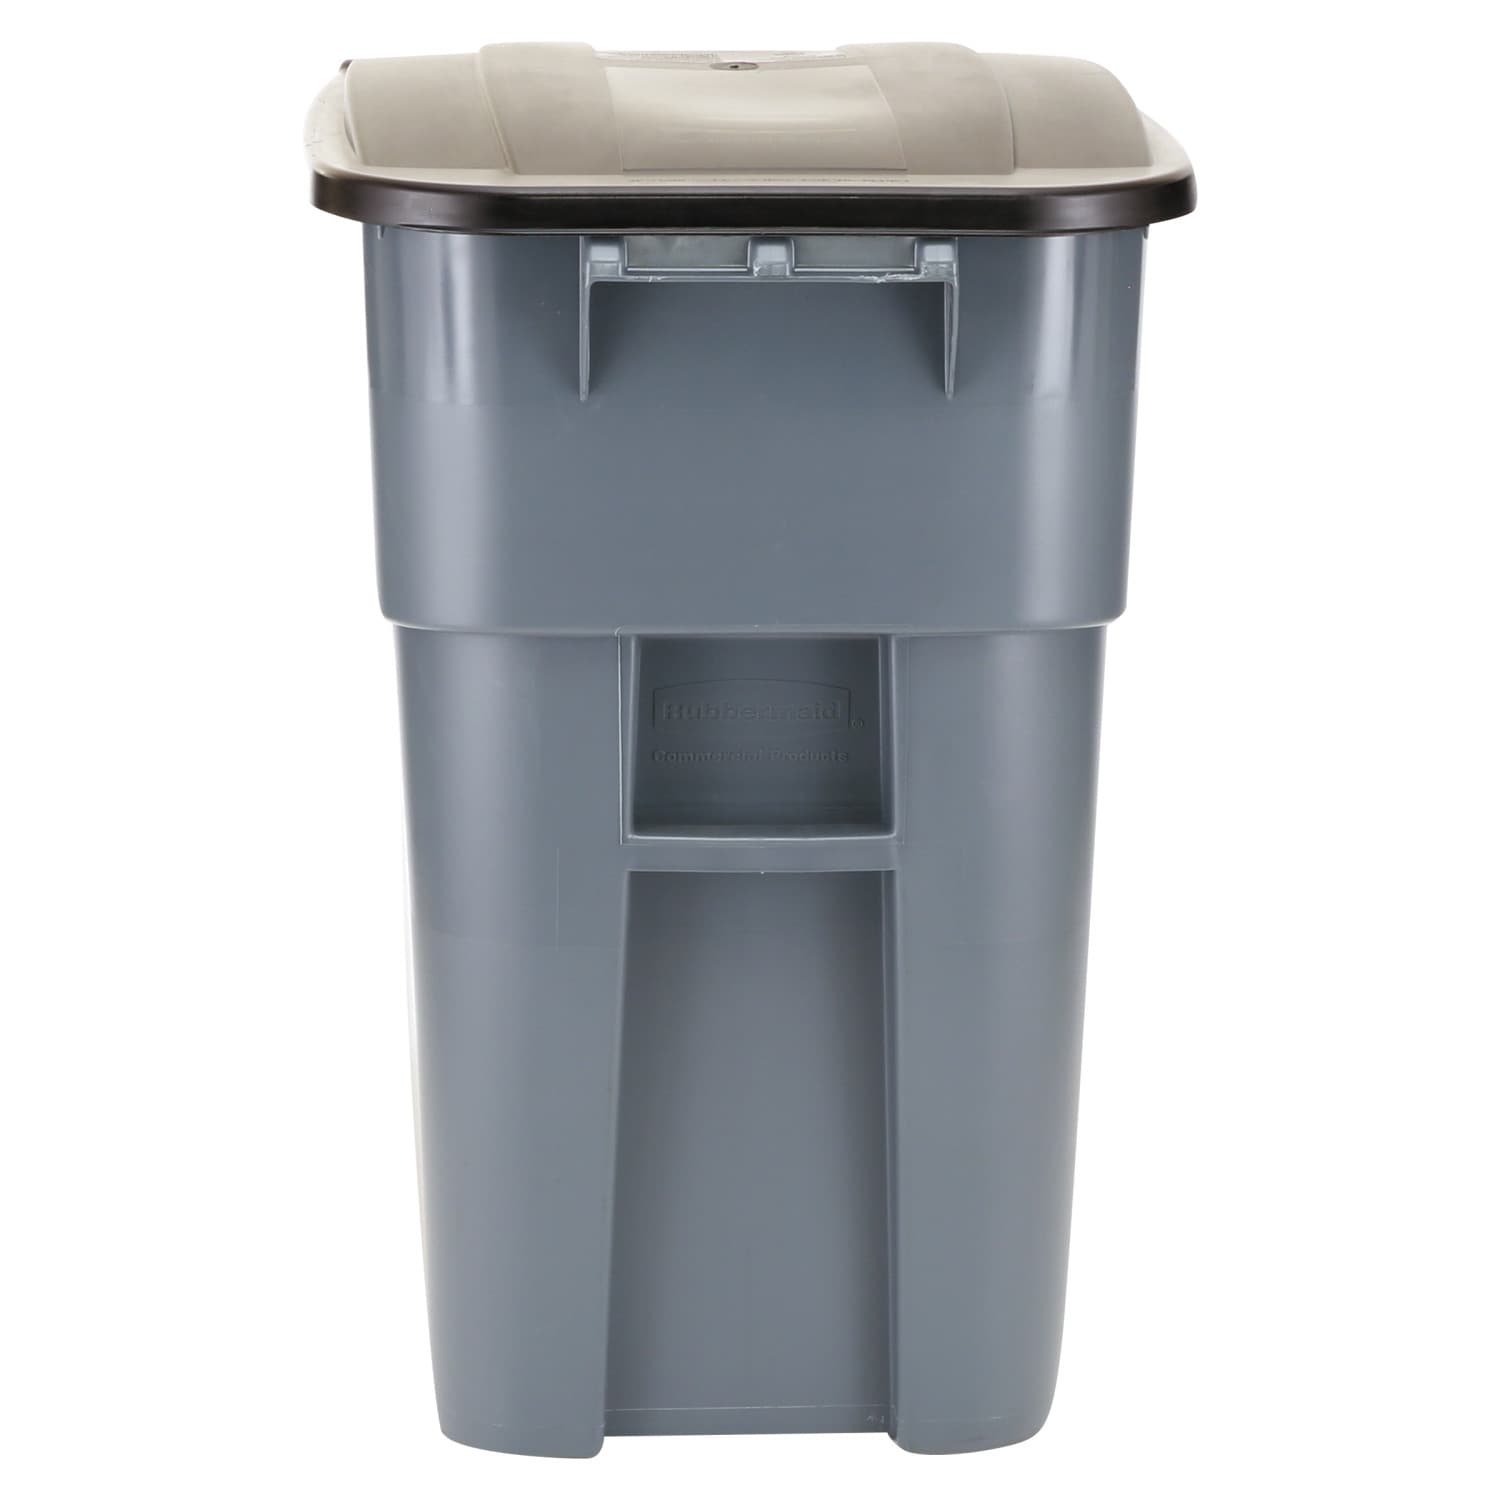 Fancy Large Outdoor Plastic Garbage Can for Sale Commercial Trash